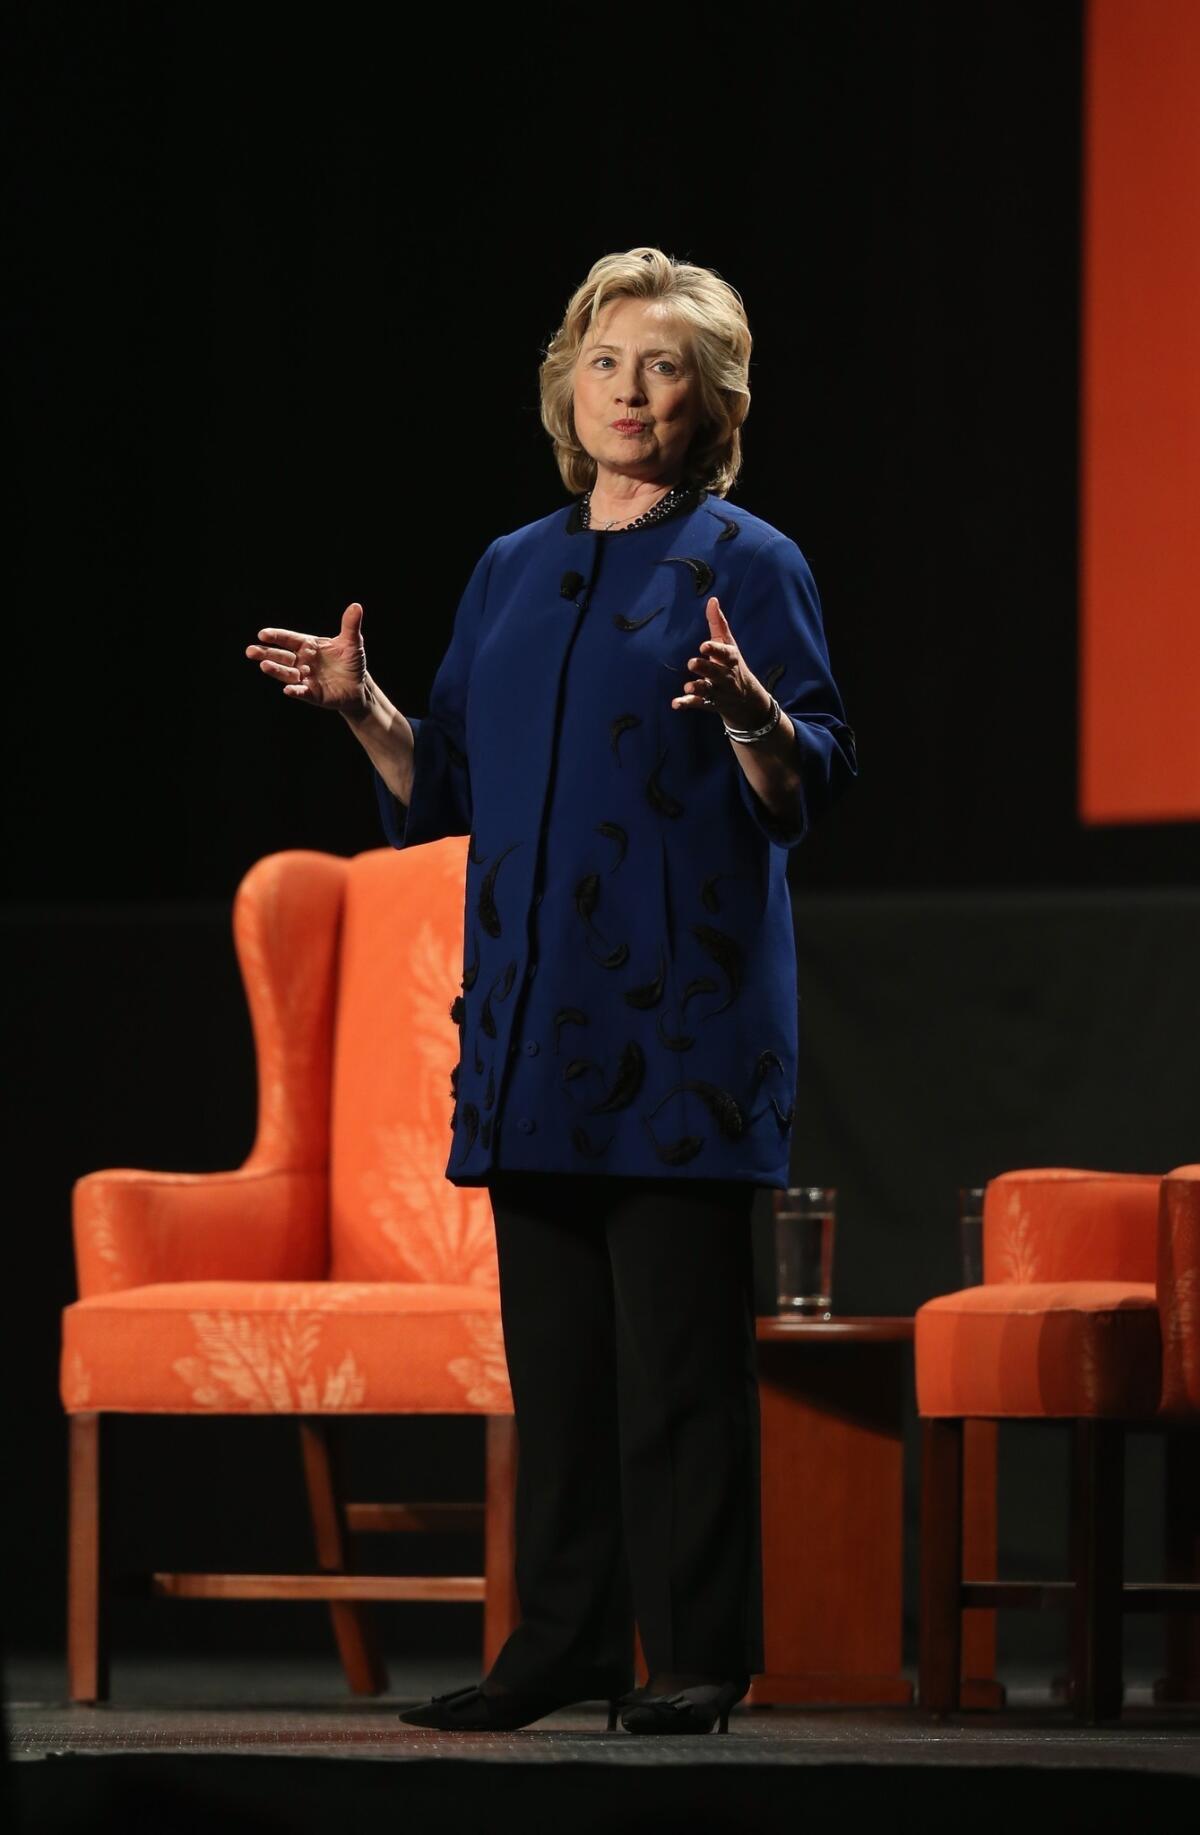 At a Wednesday night stop in Coral Gables, Fla., Hillary Rodham Clinton revealed nothing about her future plans. But she did offer a glimpse of some possible themes in a 2016 run for president.